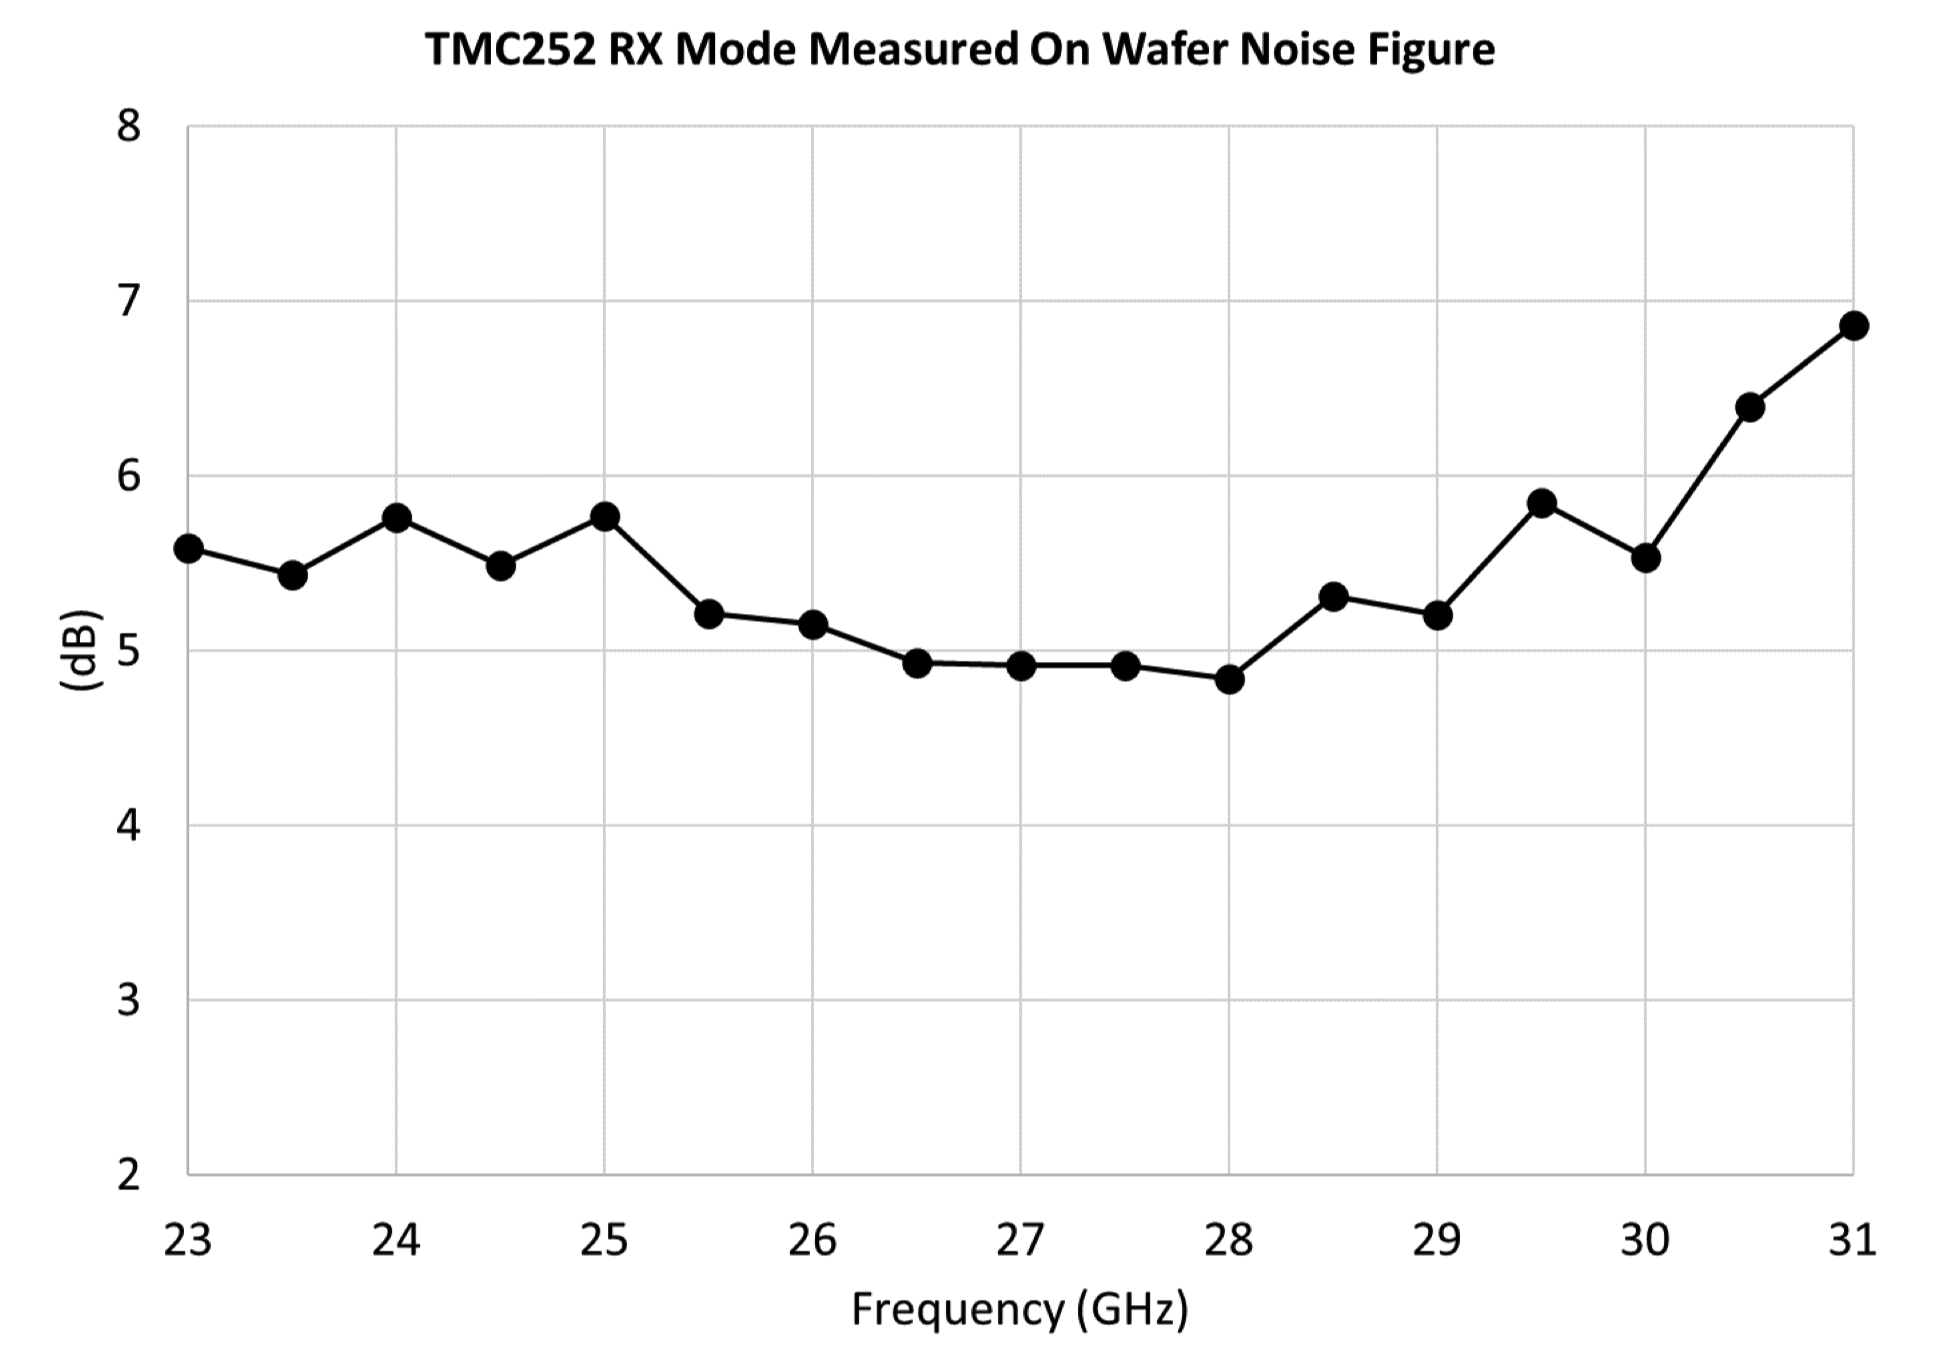 TMC252 receive path measured on-wafer noise figure from 23 to 31 GHz.